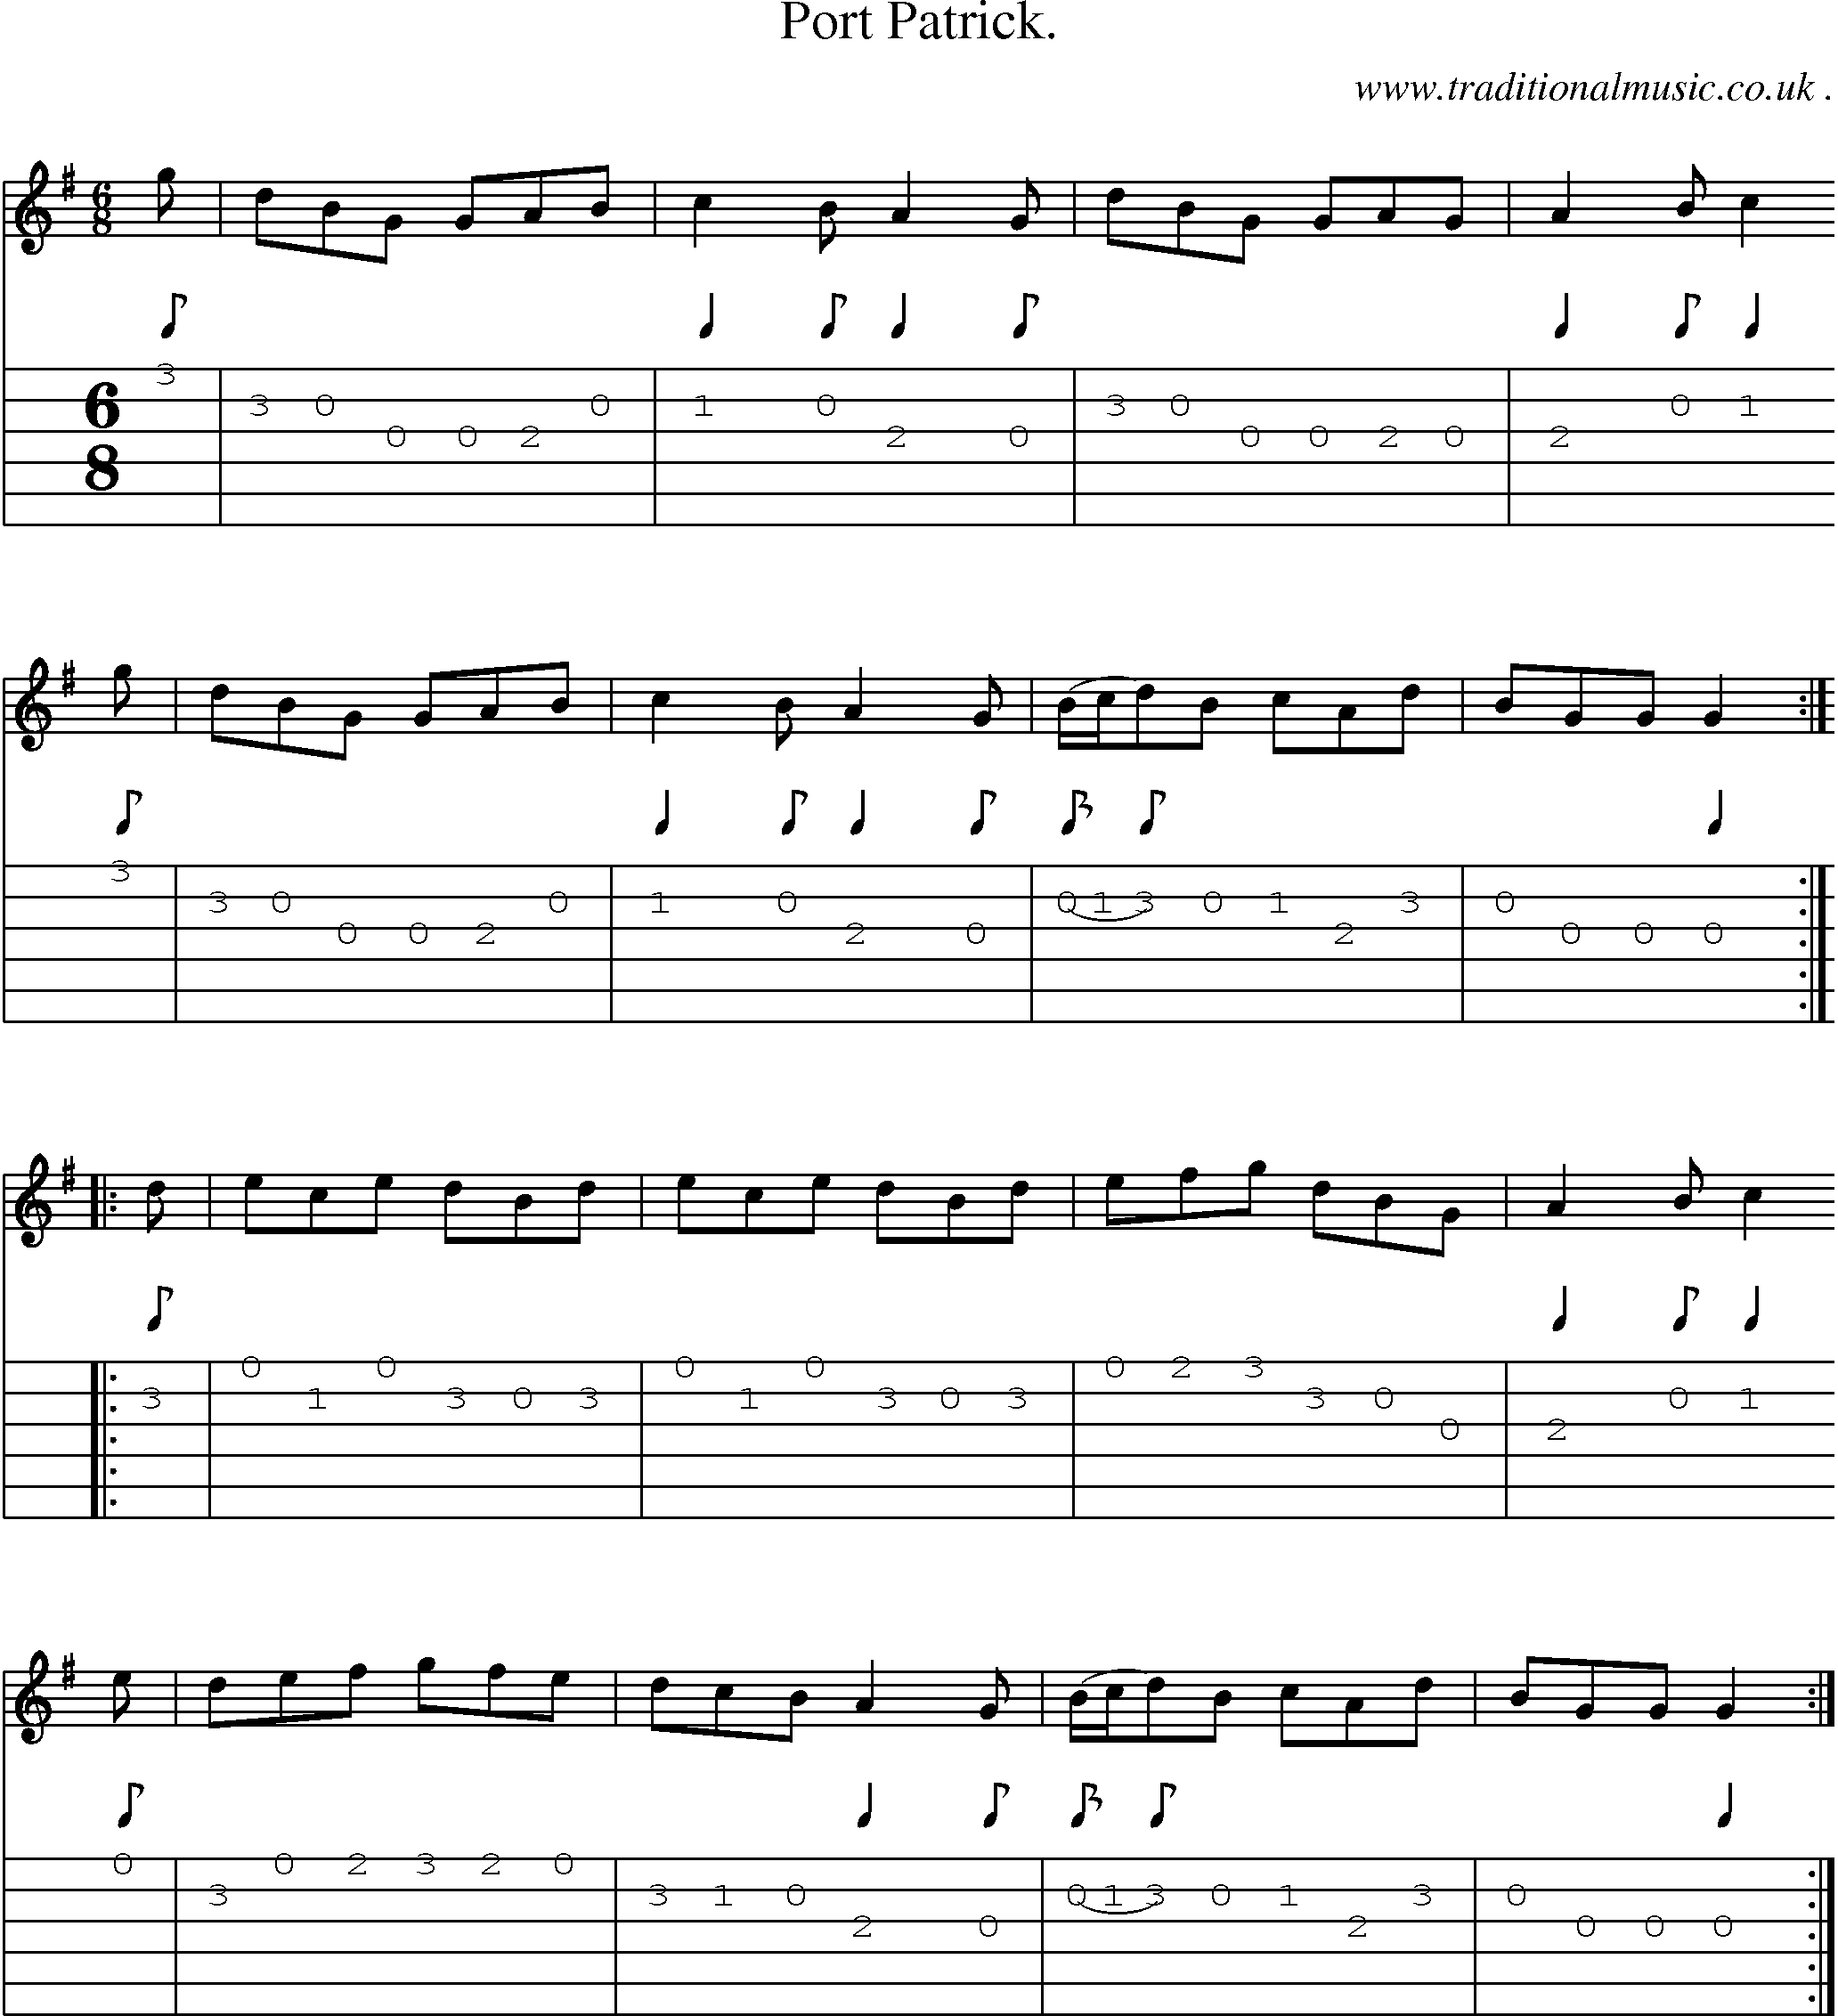 Sheet-Music and Guitar Tabs for Port Patrick